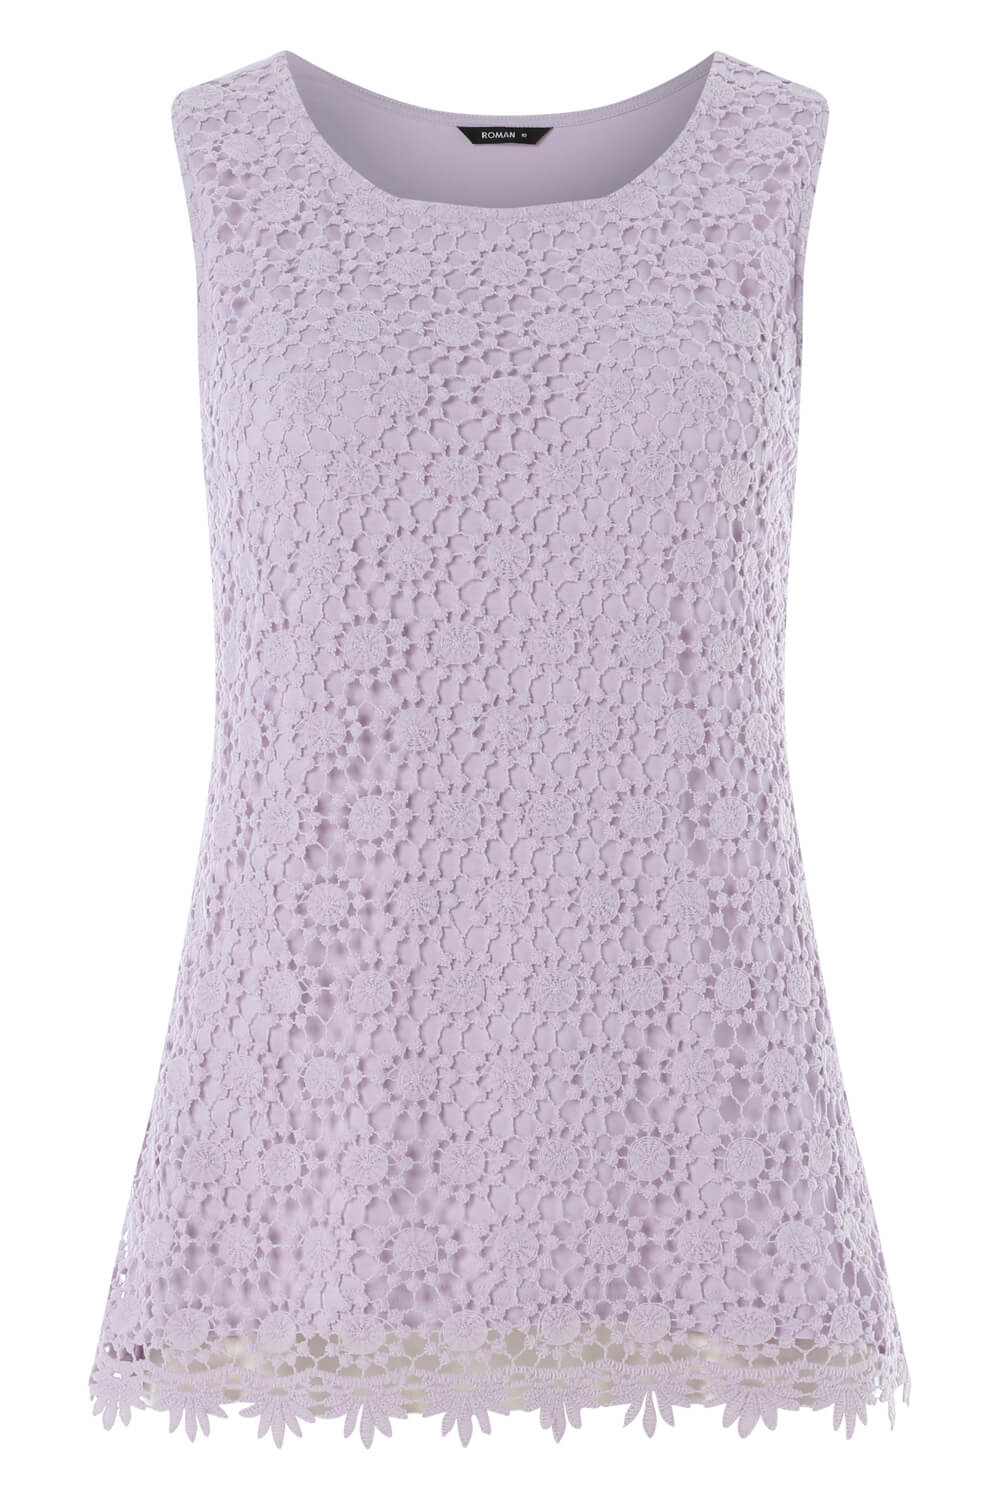 Lilac Lace Front Jersey Vest Top, Image 4 of 8